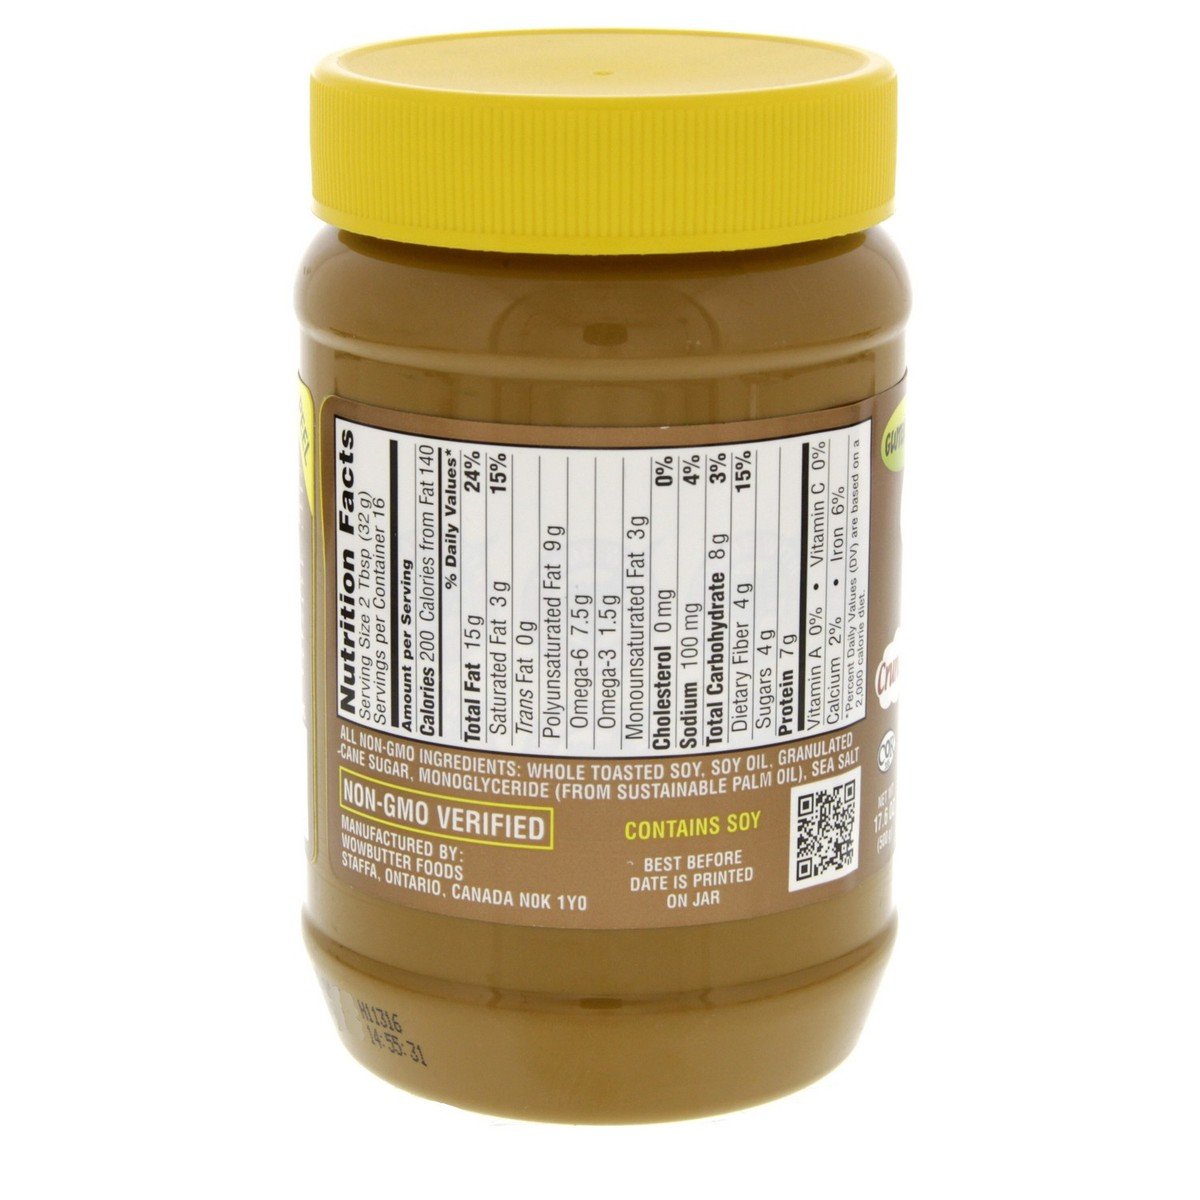 Wowbutter Crunchy Toasted Soy Spread Gluten Free 500g